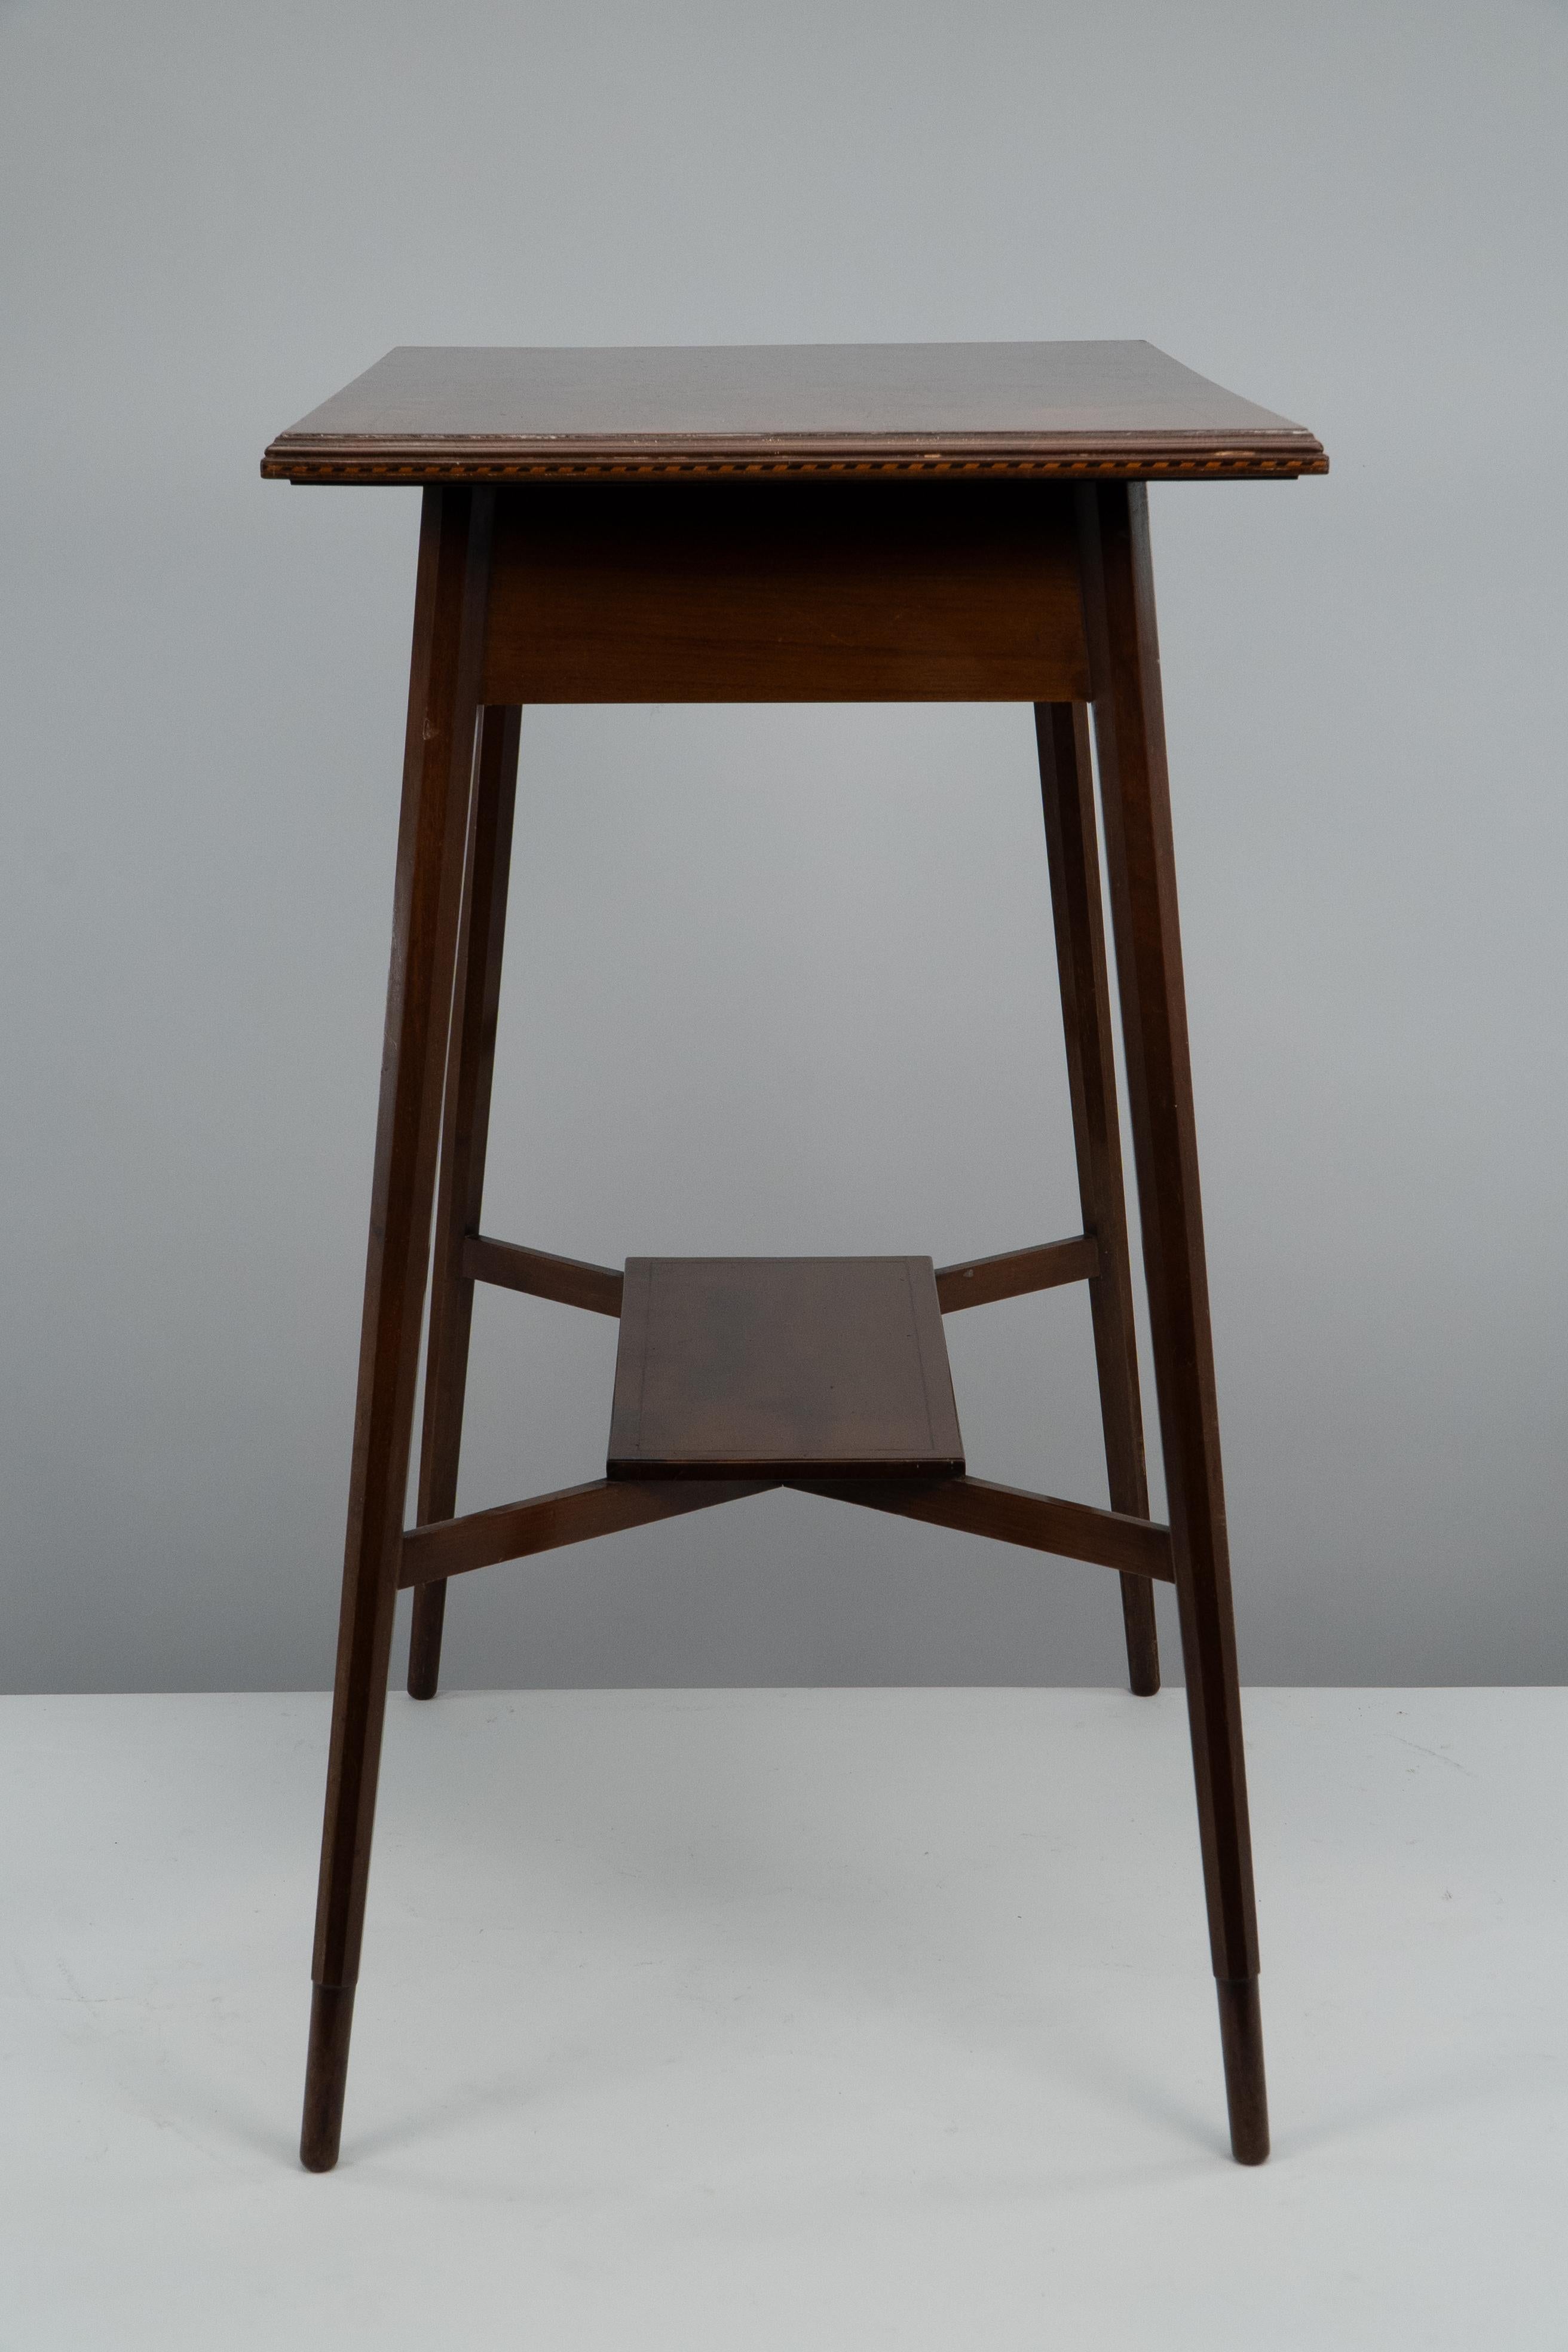 Morris & Co. A fine quality Aesthetic Movement walnut side table with herringbone inlay to the top edge, stood on hexagonal shaped legs with a lower shelf